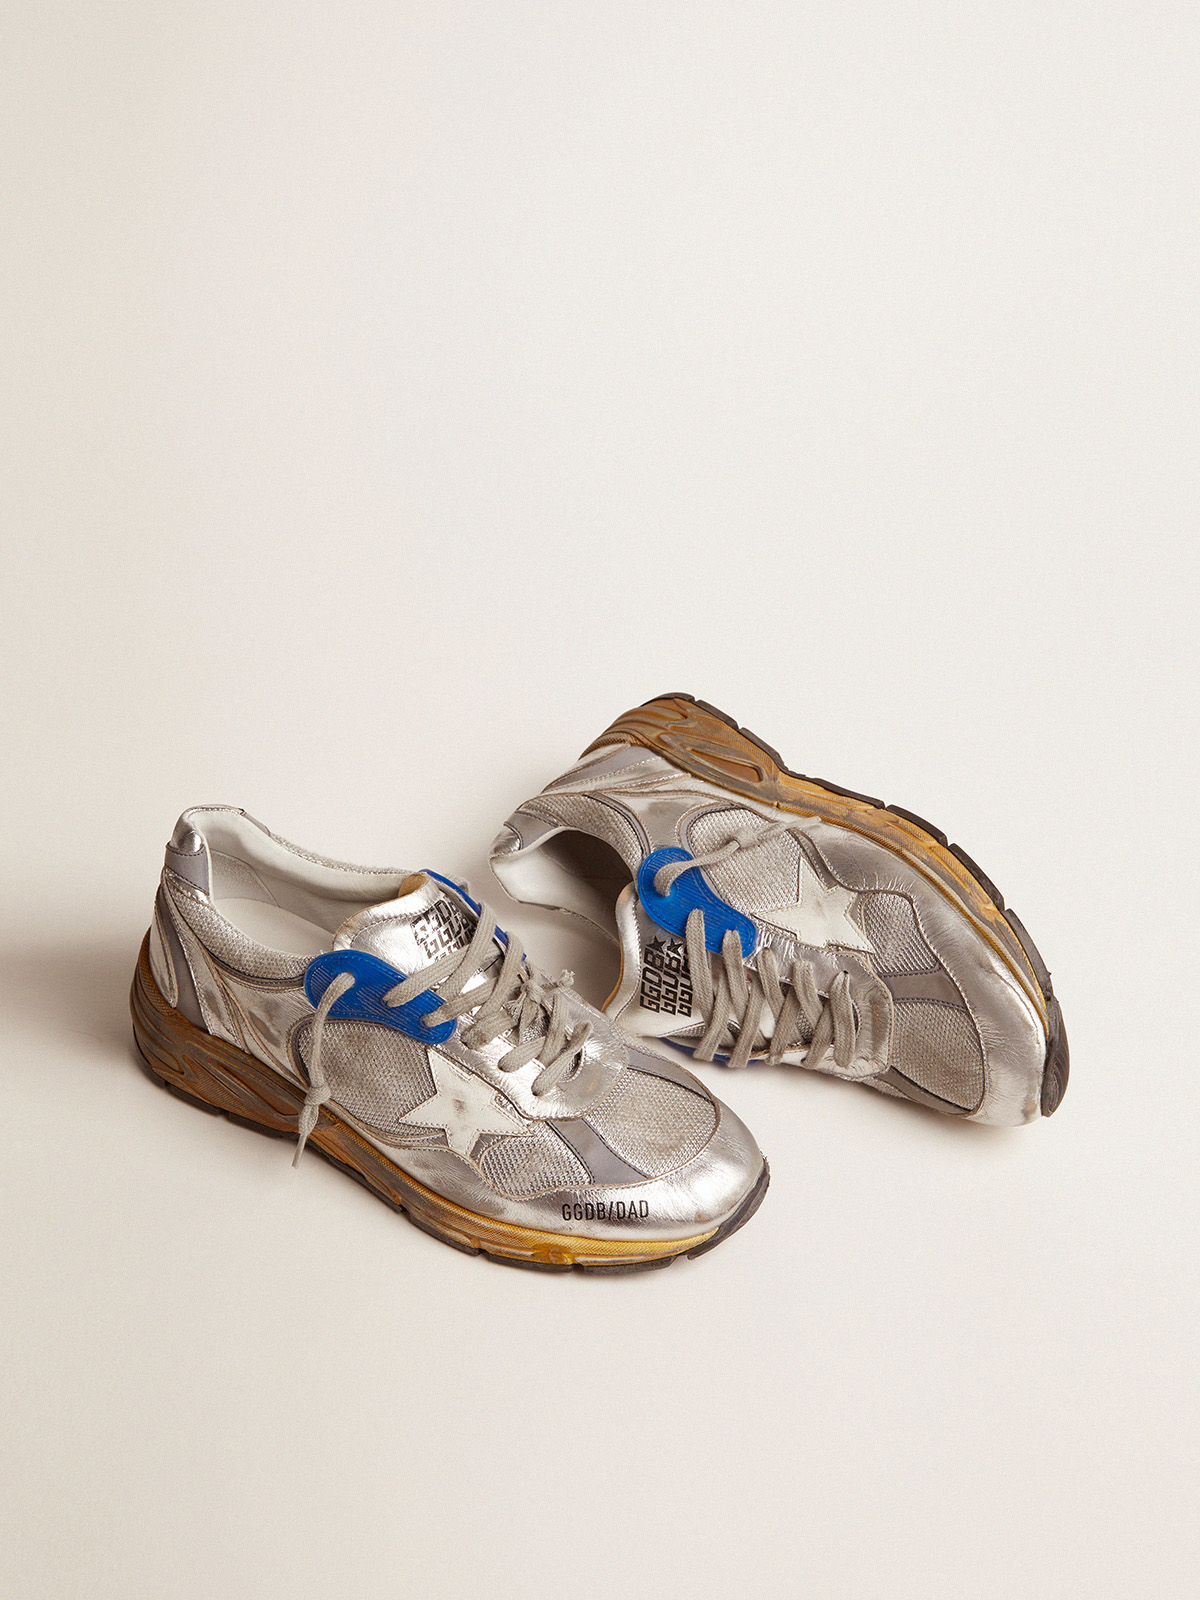 Silver Dad-Star sneakers with distressed finish | Golden Goose